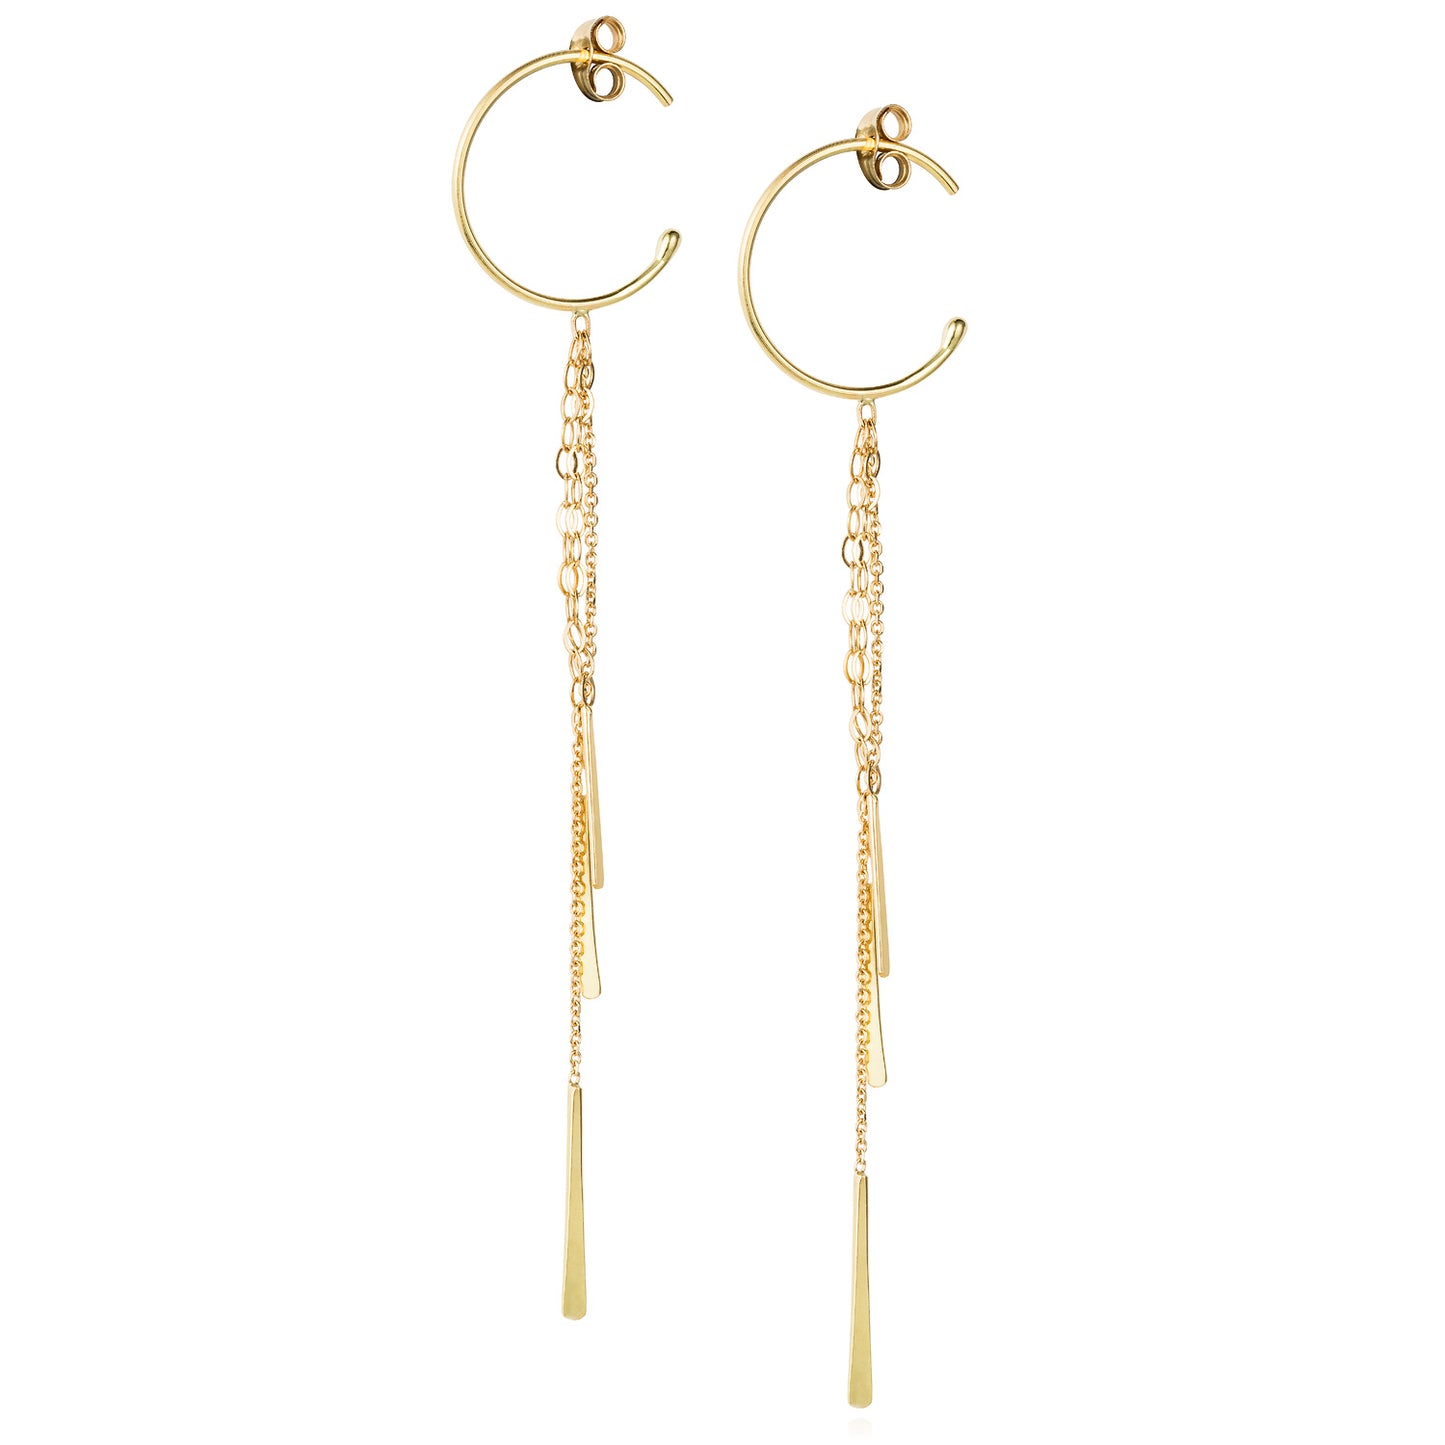  18ct yellow gold small hoop earrings with hanging chains and bars